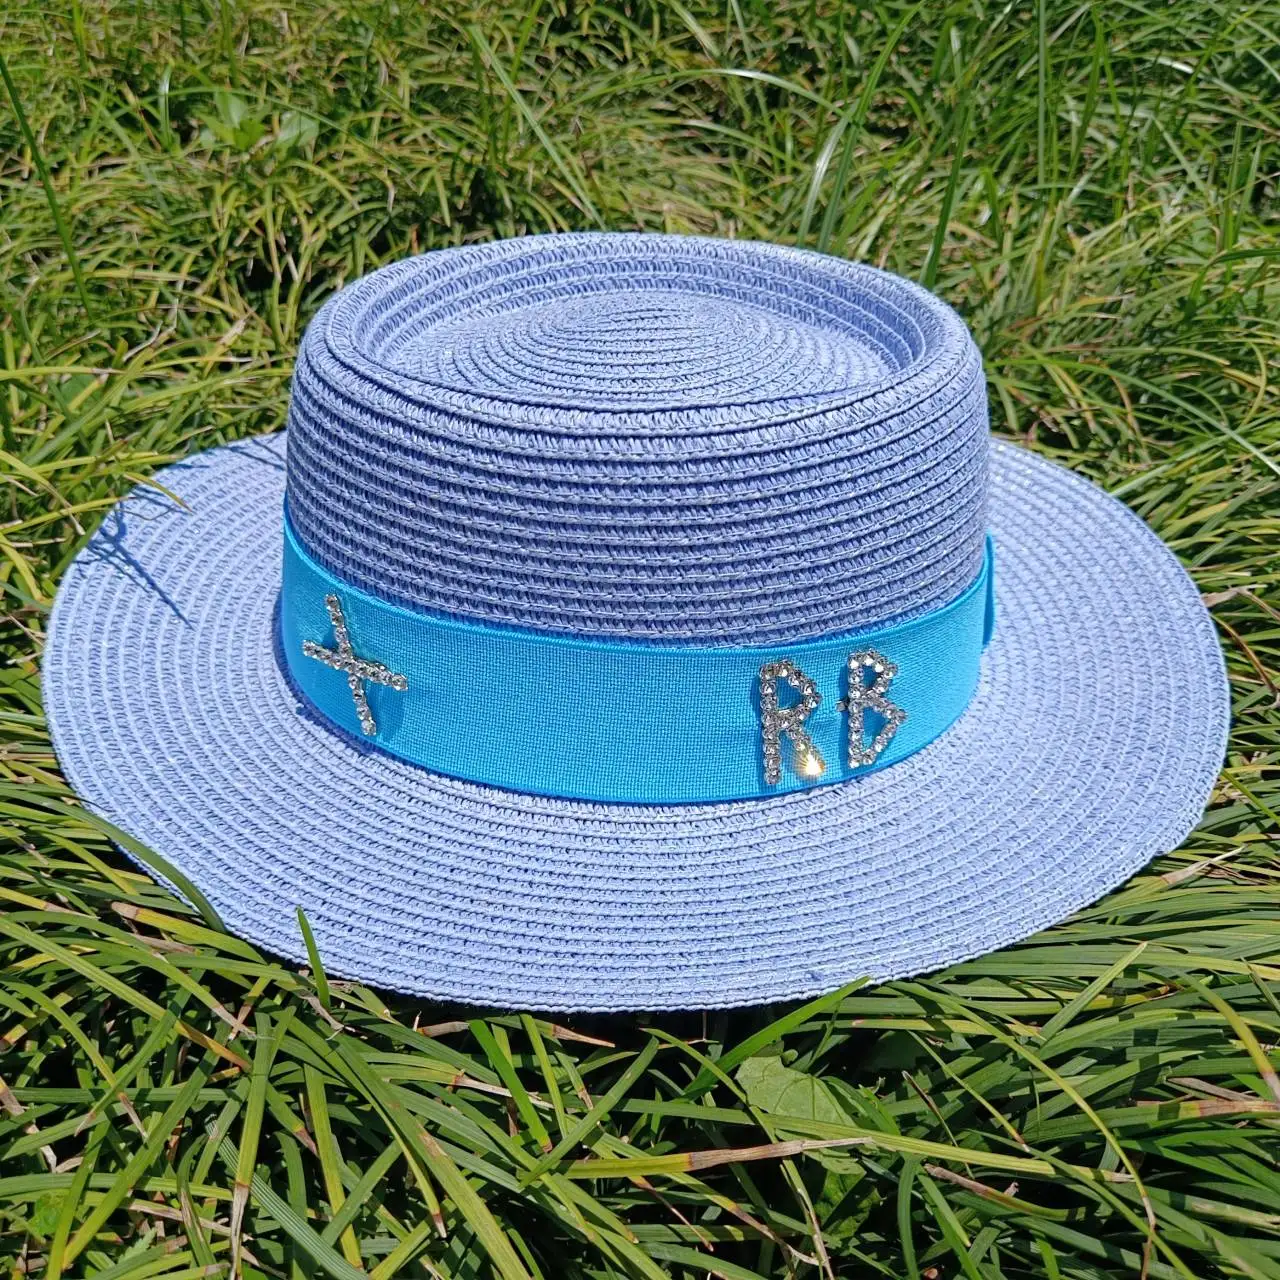 

Summer straw hat letter elastic webbing for men and women's new adjustable concave convex top Straw sun hat beach hat